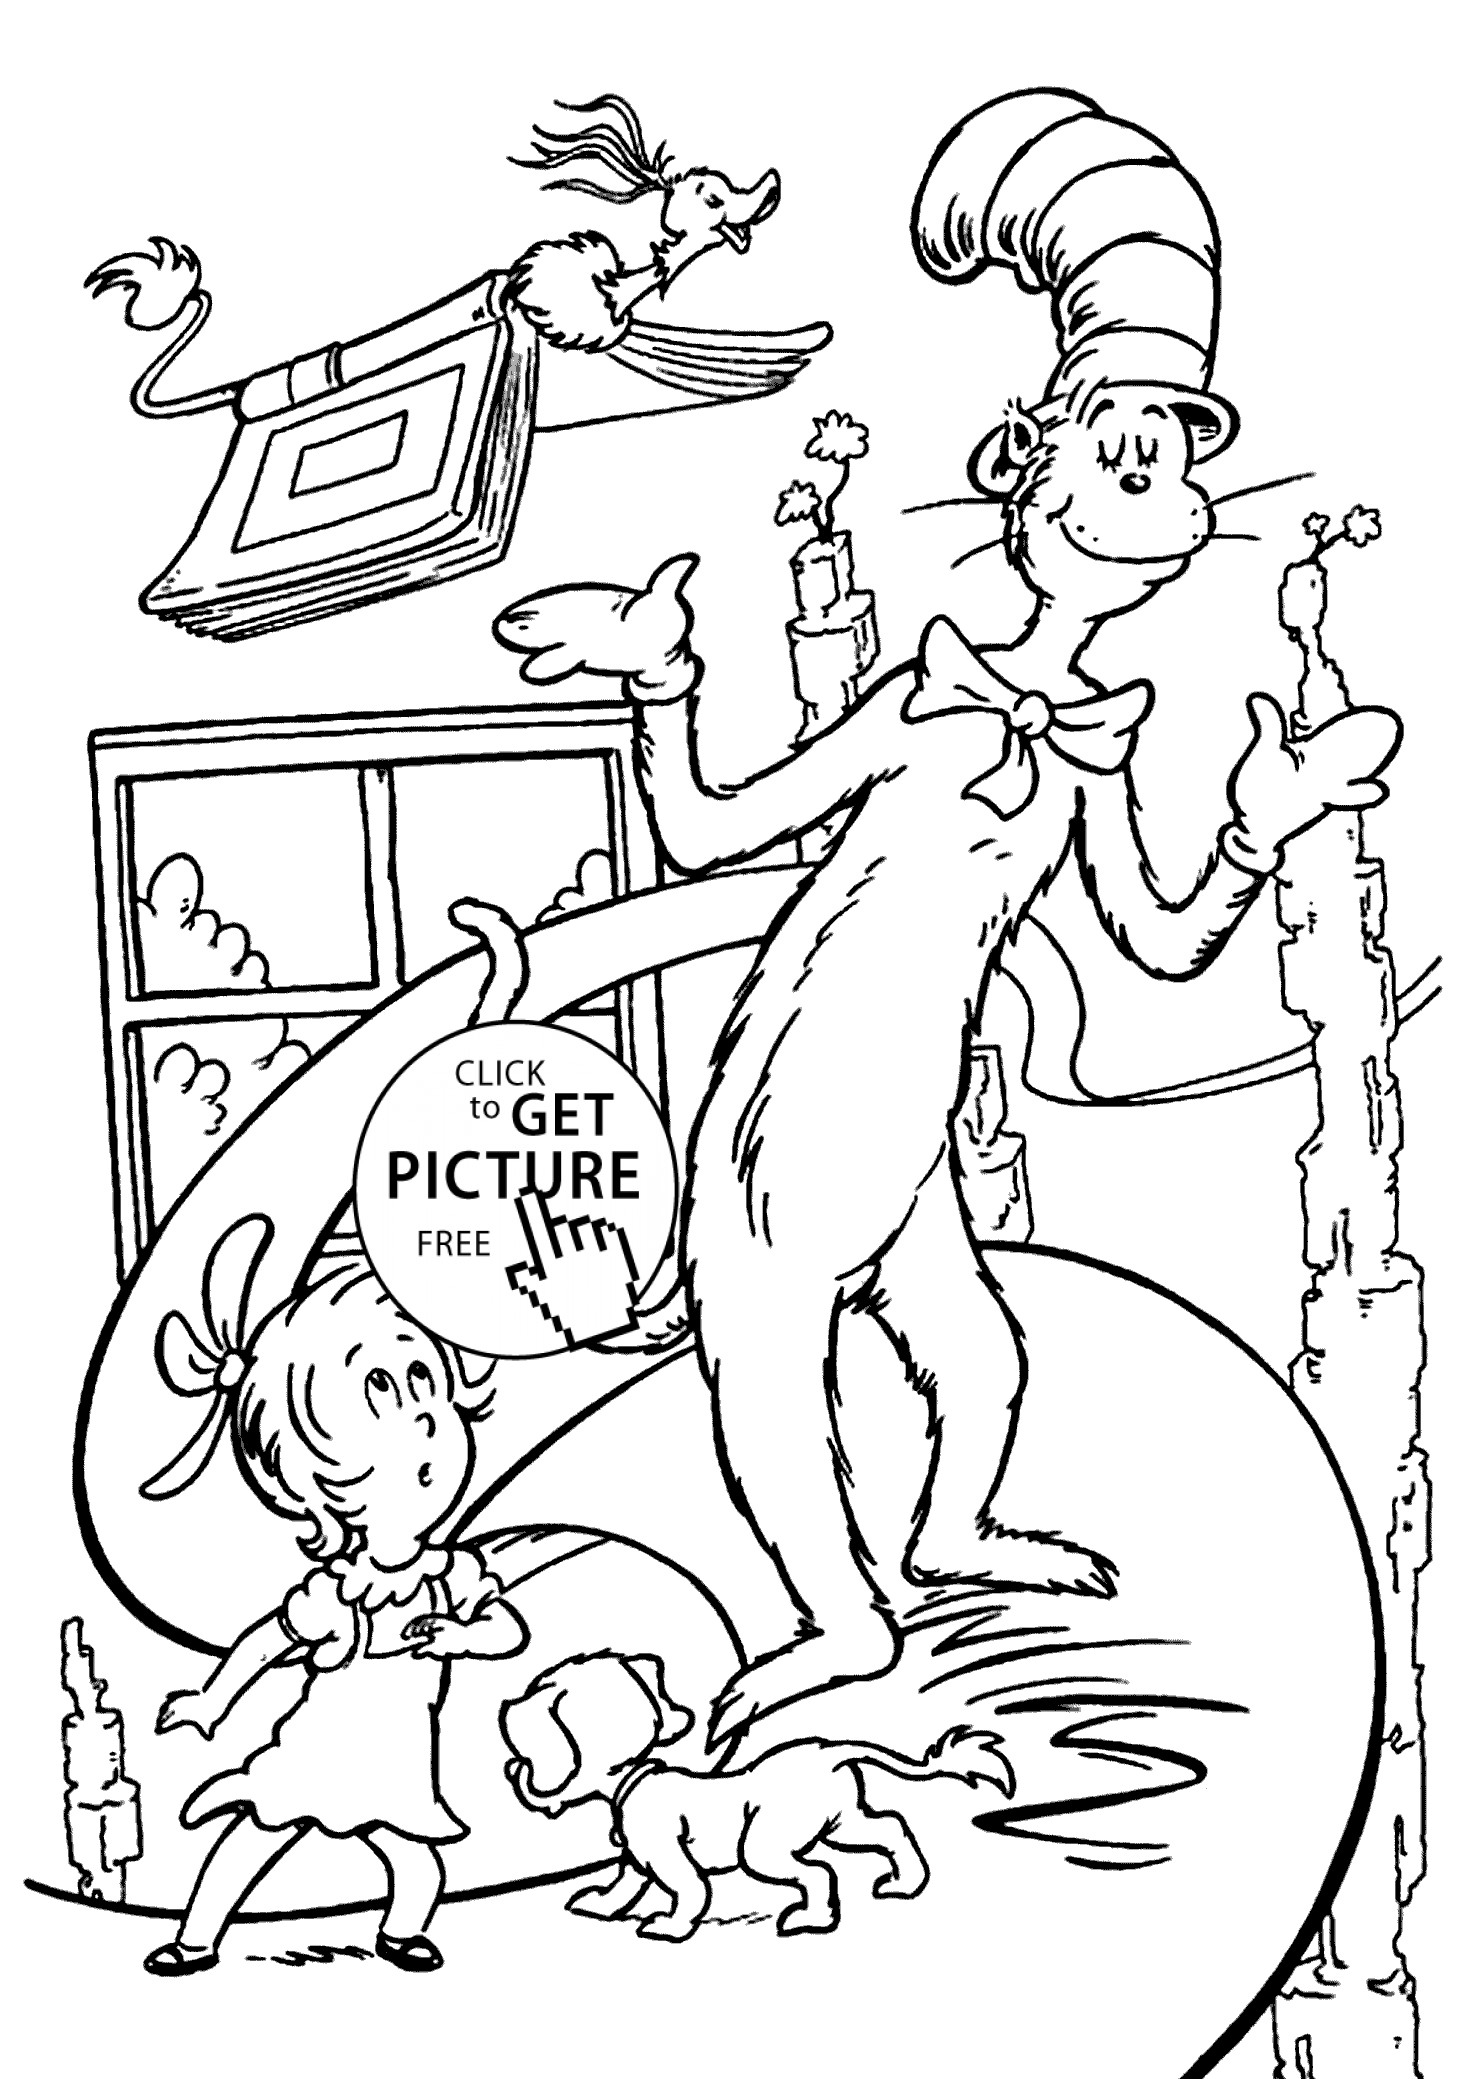 Free Dr Seuss Coloring Sheets For Kids
 Funny Сat in the hat coloring pages for kids printable